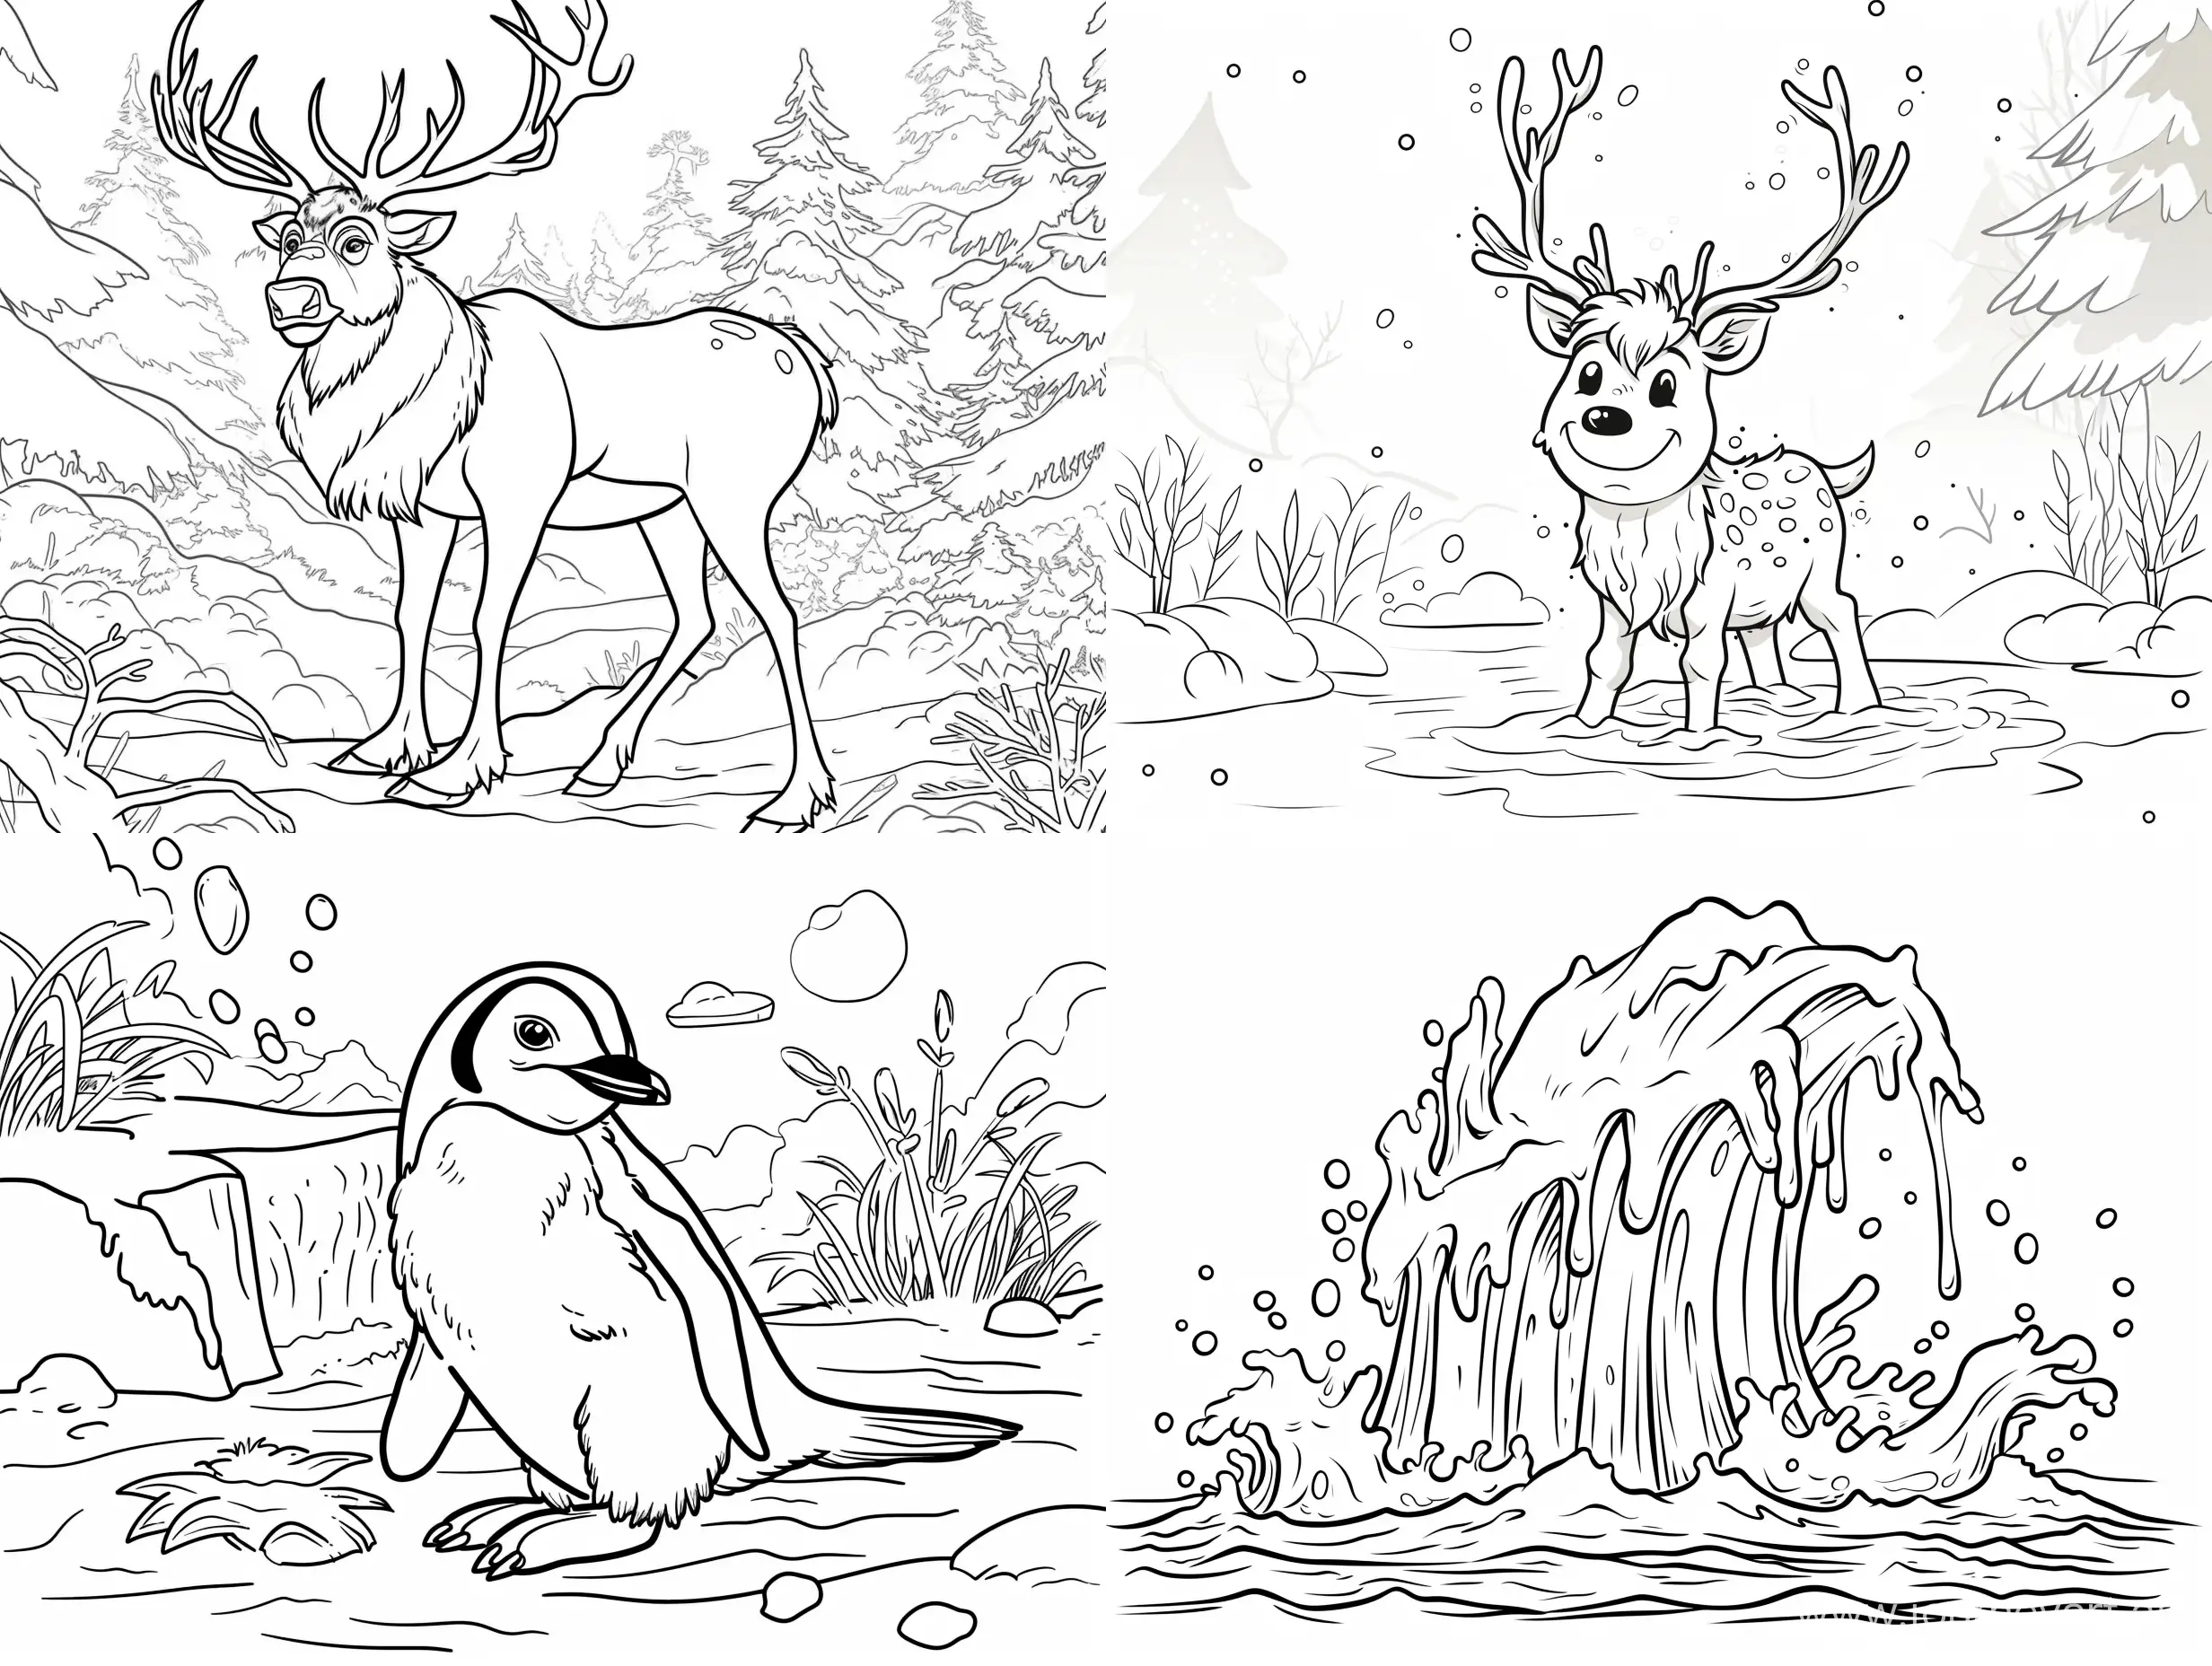 coloring page for kids, detailed, simply cartoon style, isolated, soviet cartoon, spirit of water, frozen